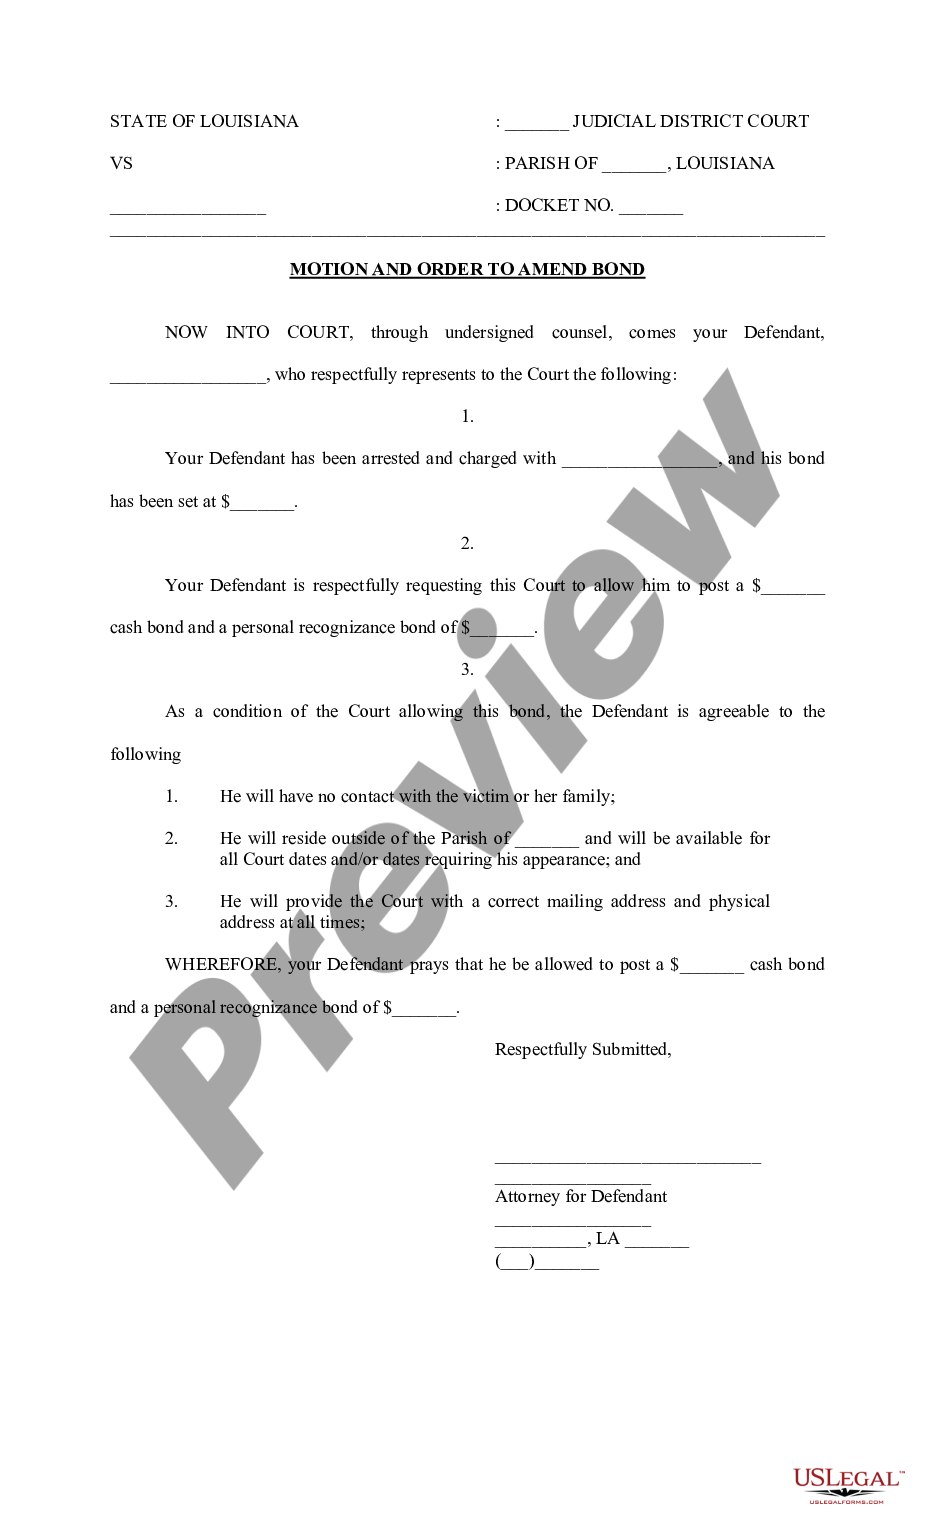 page 0 Motion and Order to Amend Bond preview